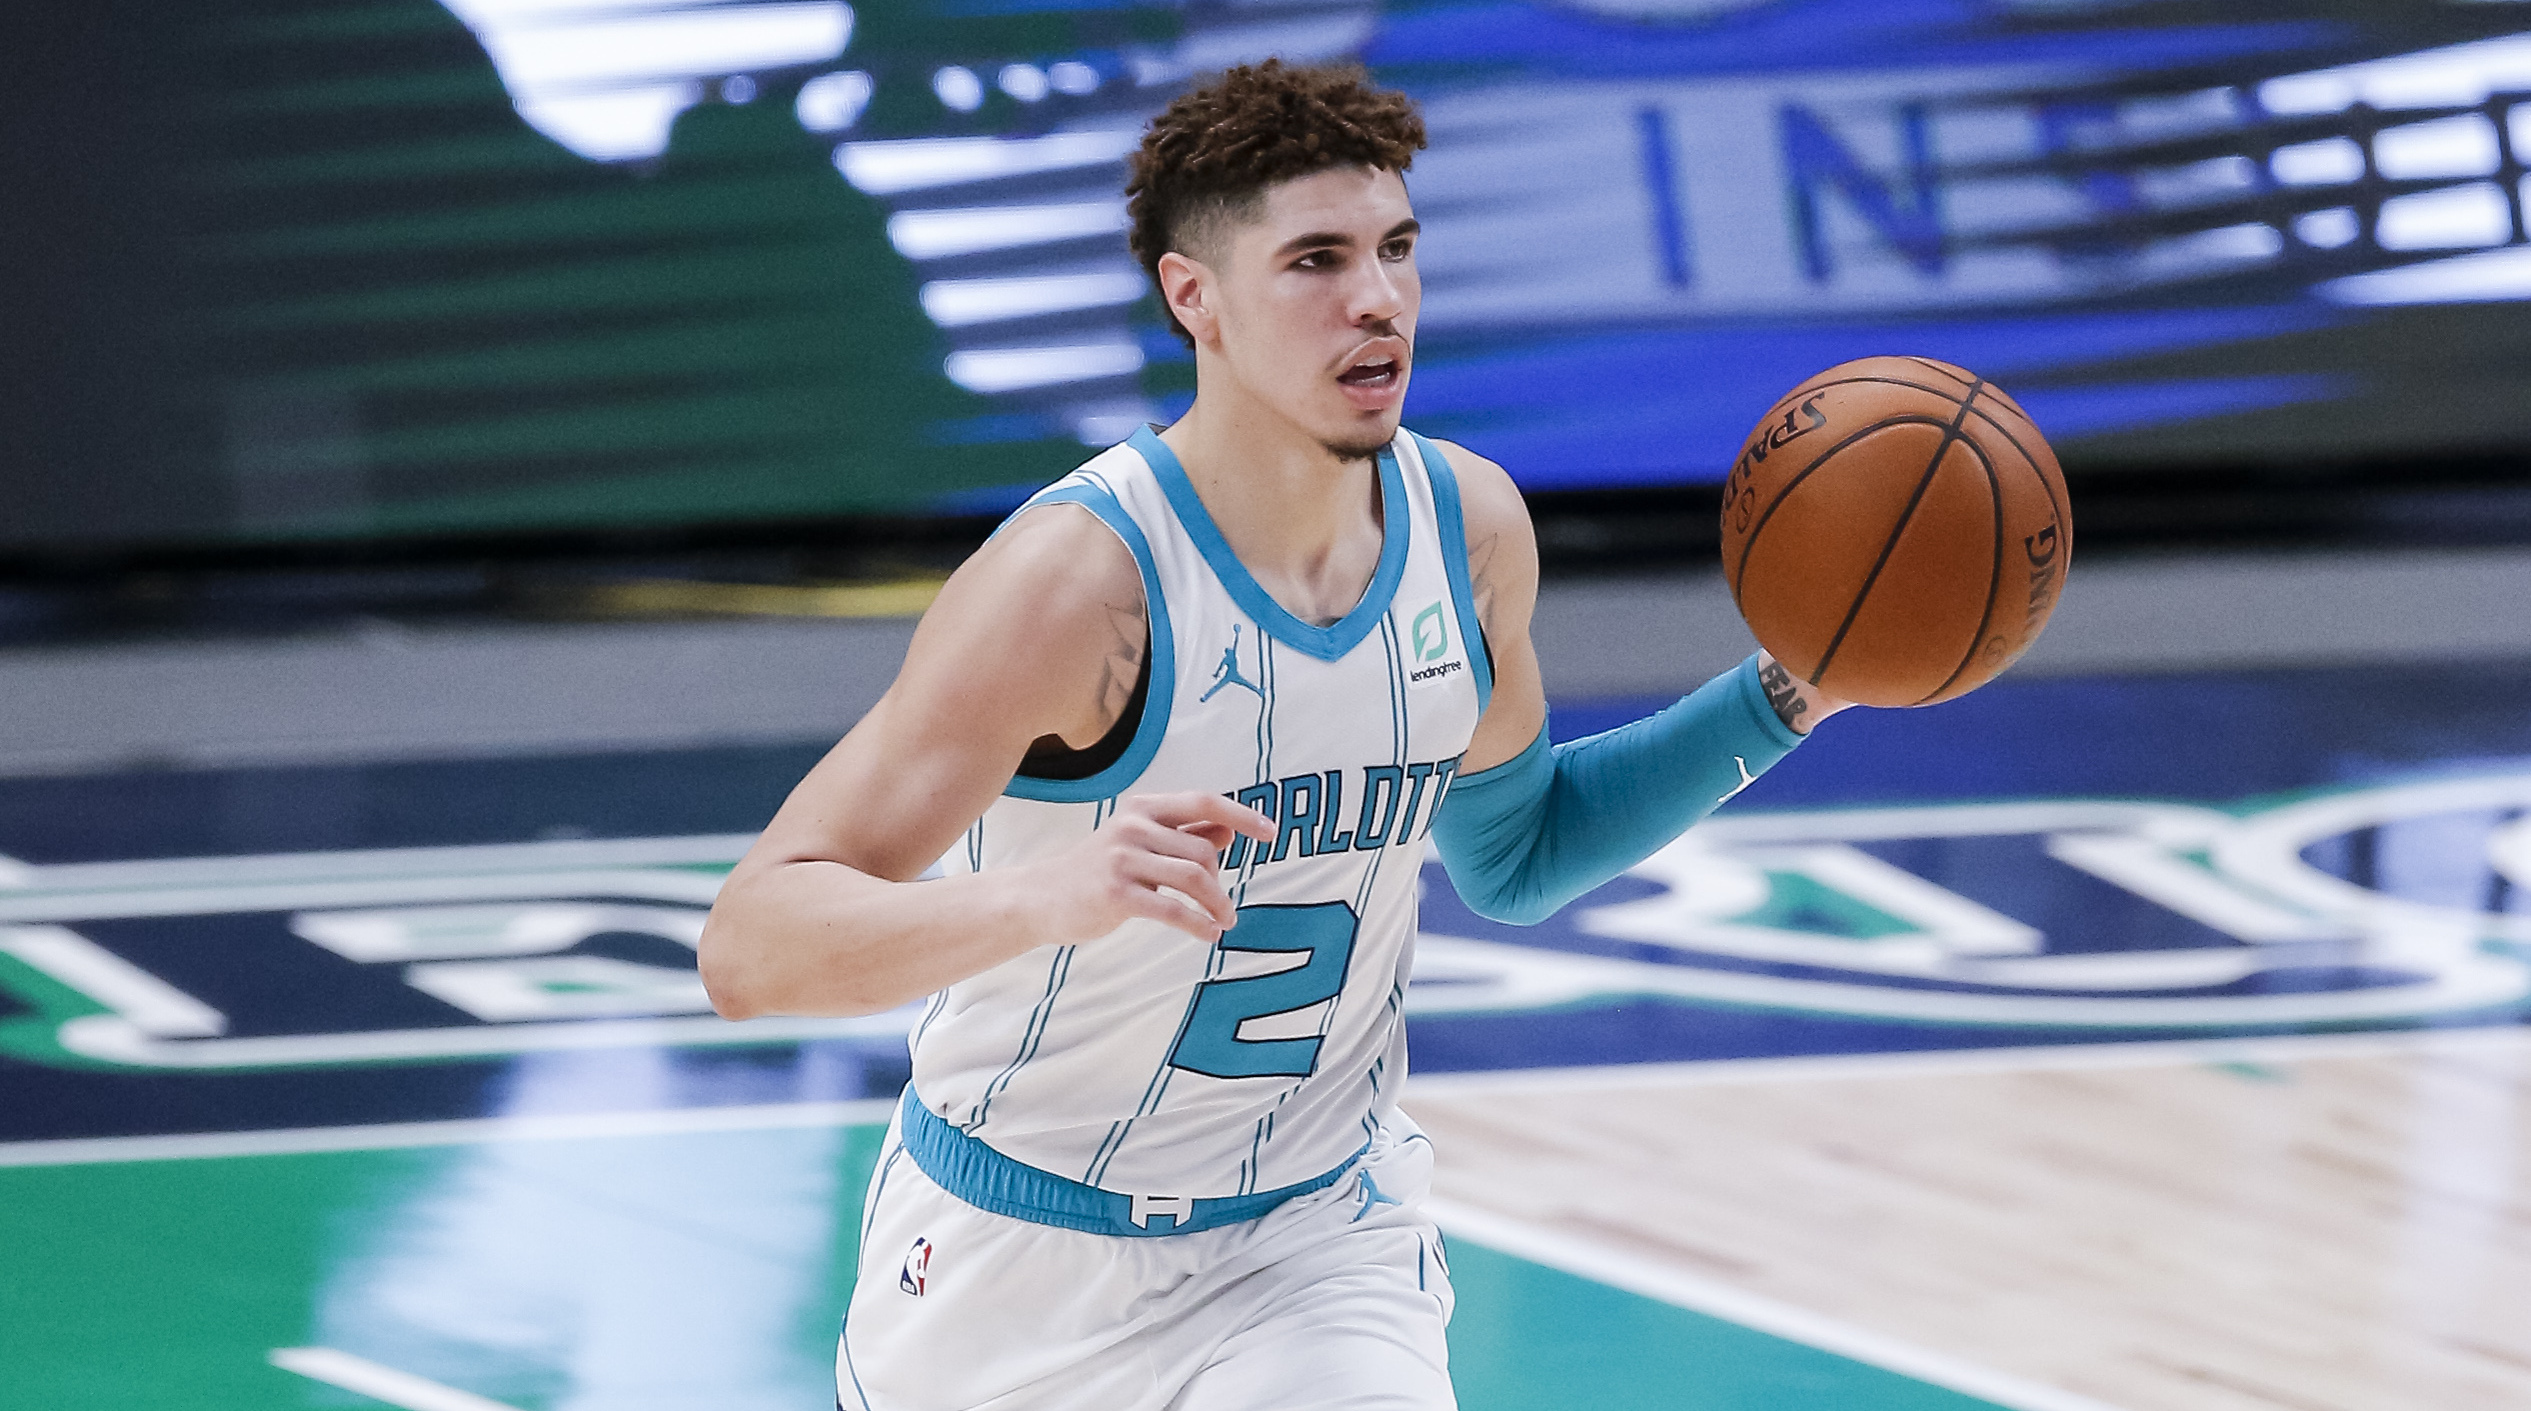 Why do people keep saying Lamelo is 6'8? : r/nba